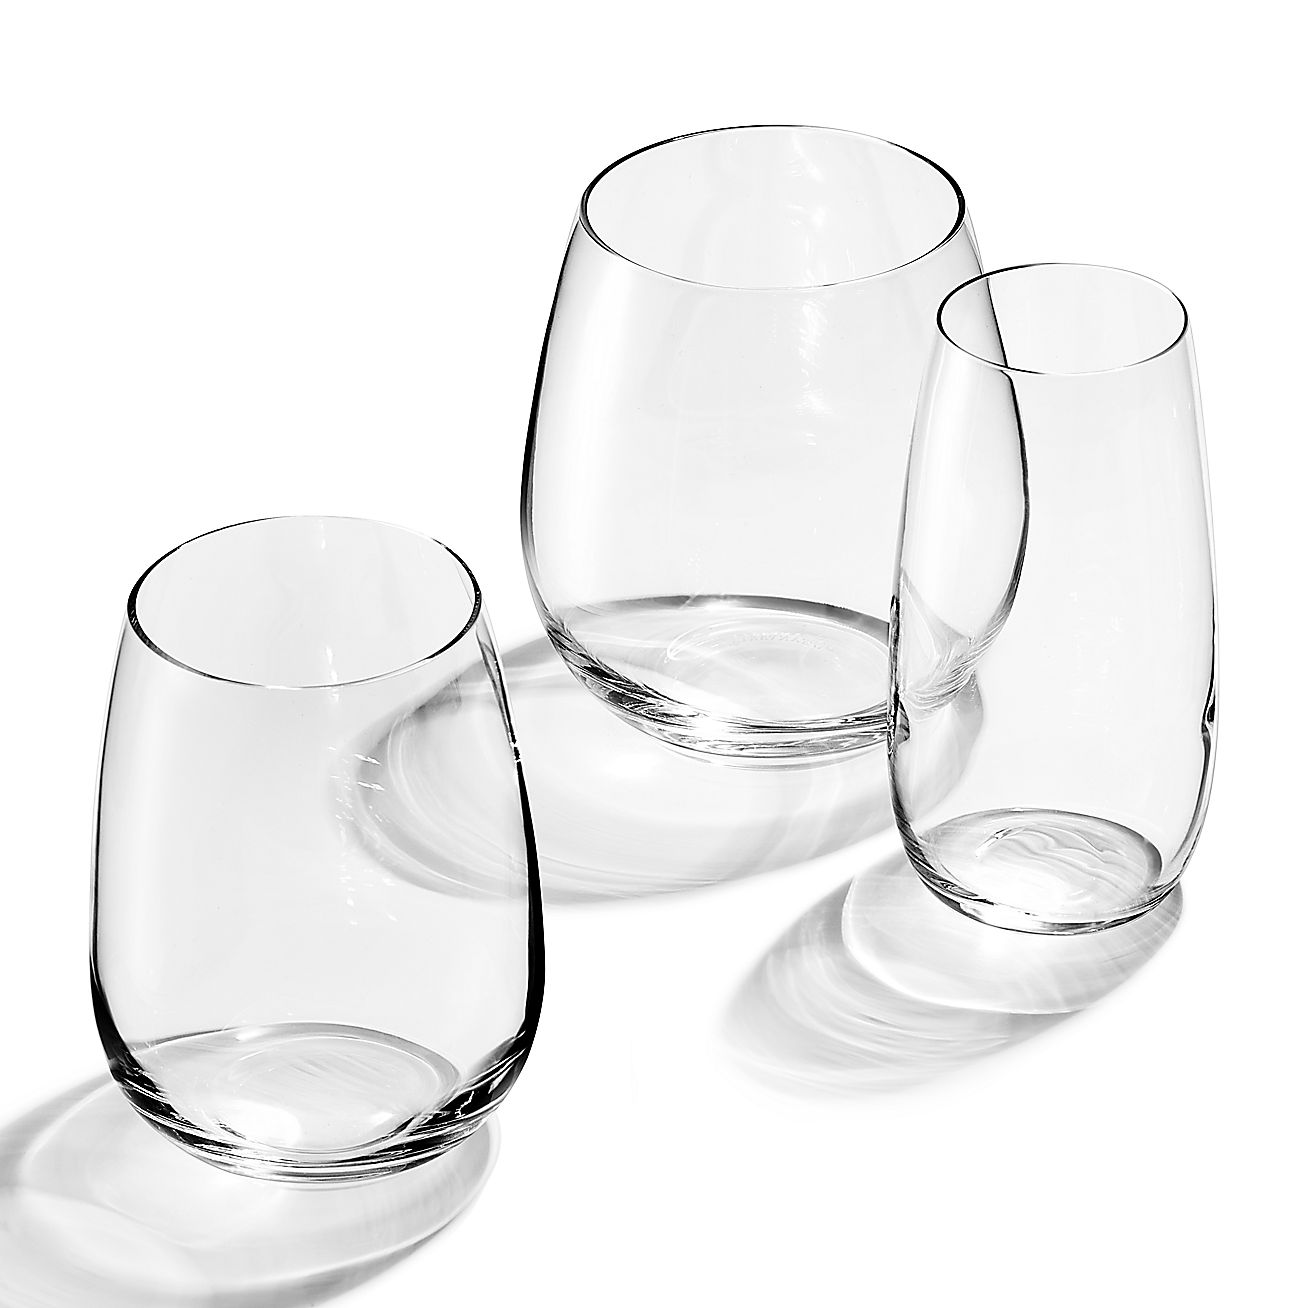 Tiffany Audubon Stemless Champagne Flute in Crystal Glass, Set of Two